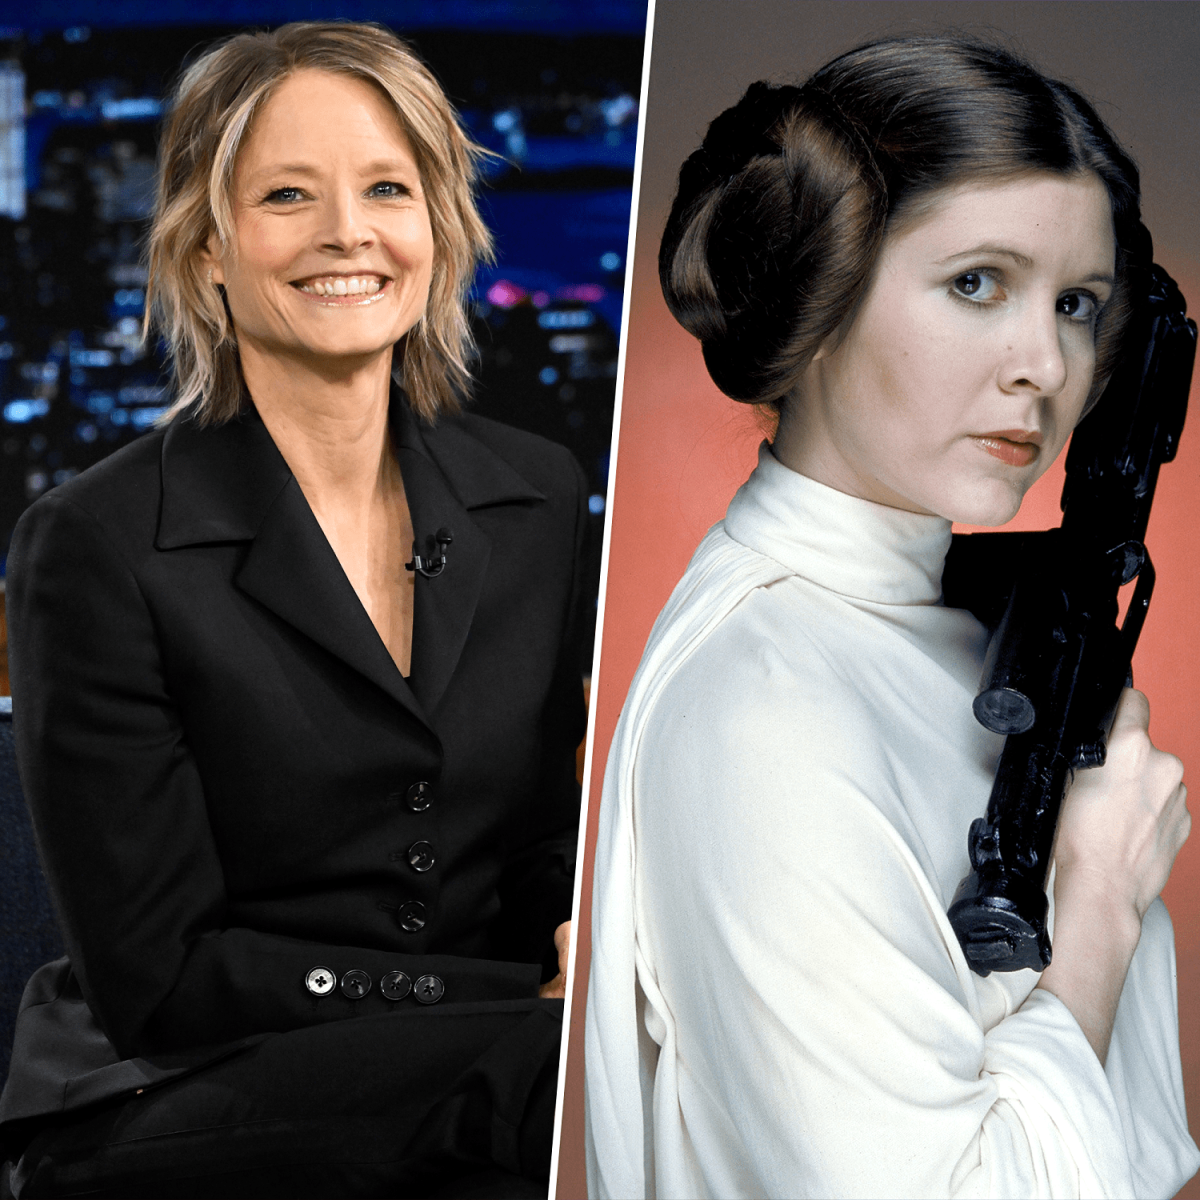 #Jodie Foster explains why she turned down the role of Princess Leia in ‘Star Wars’